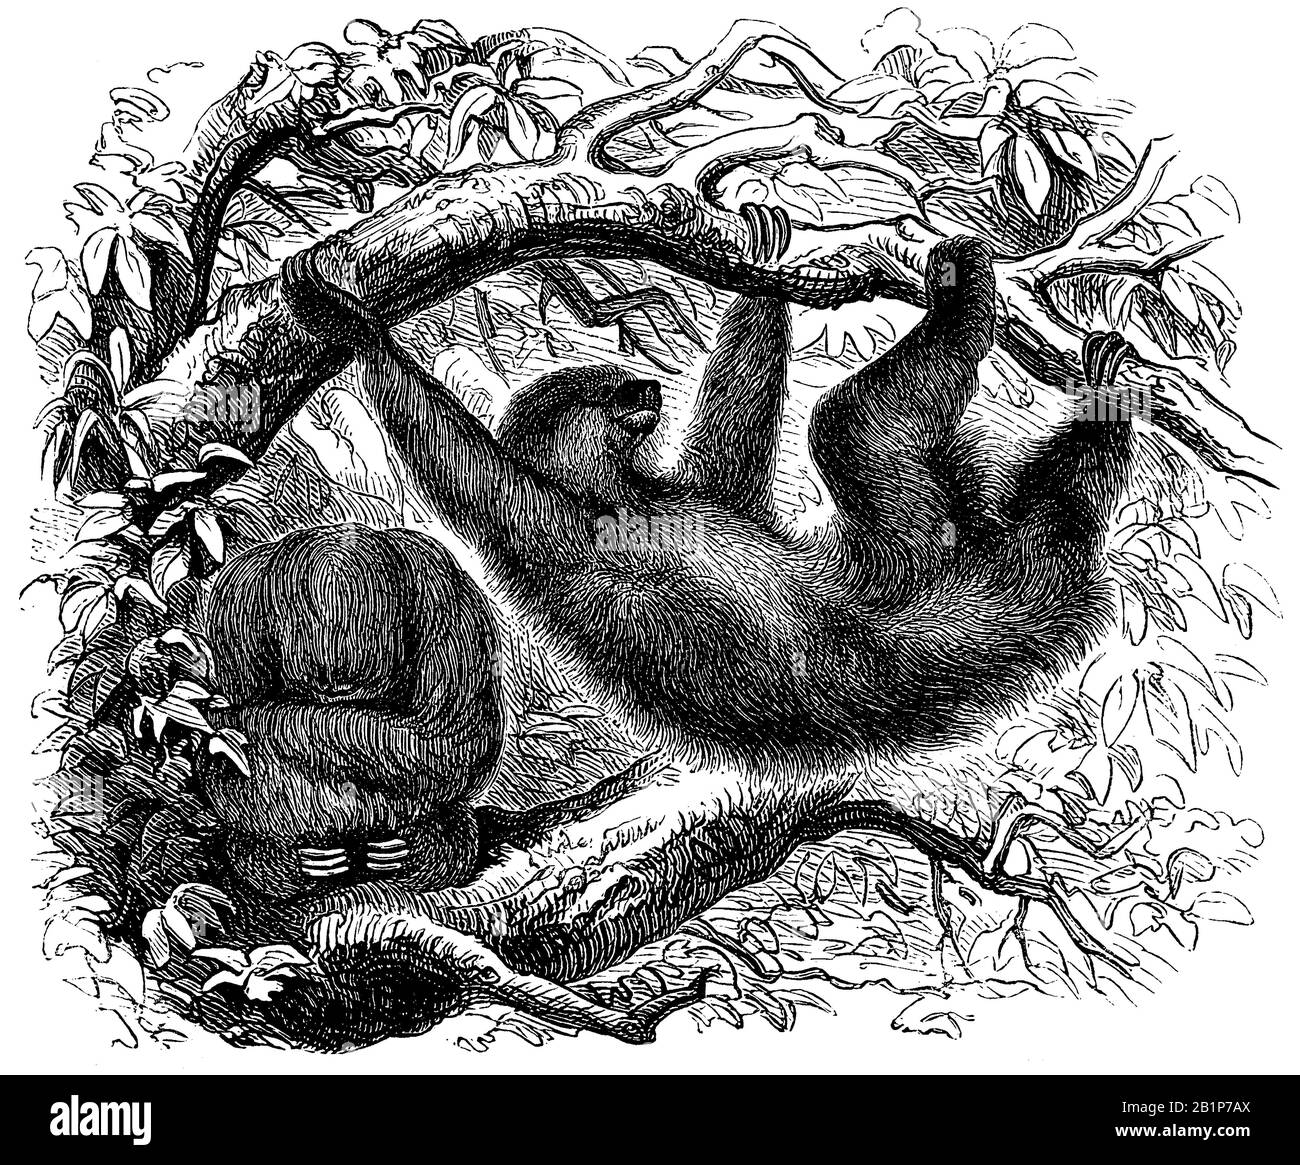 pale-throated sloth, Bradypus tridactulus, J* S* (natural history book, 1899) Stock Photo